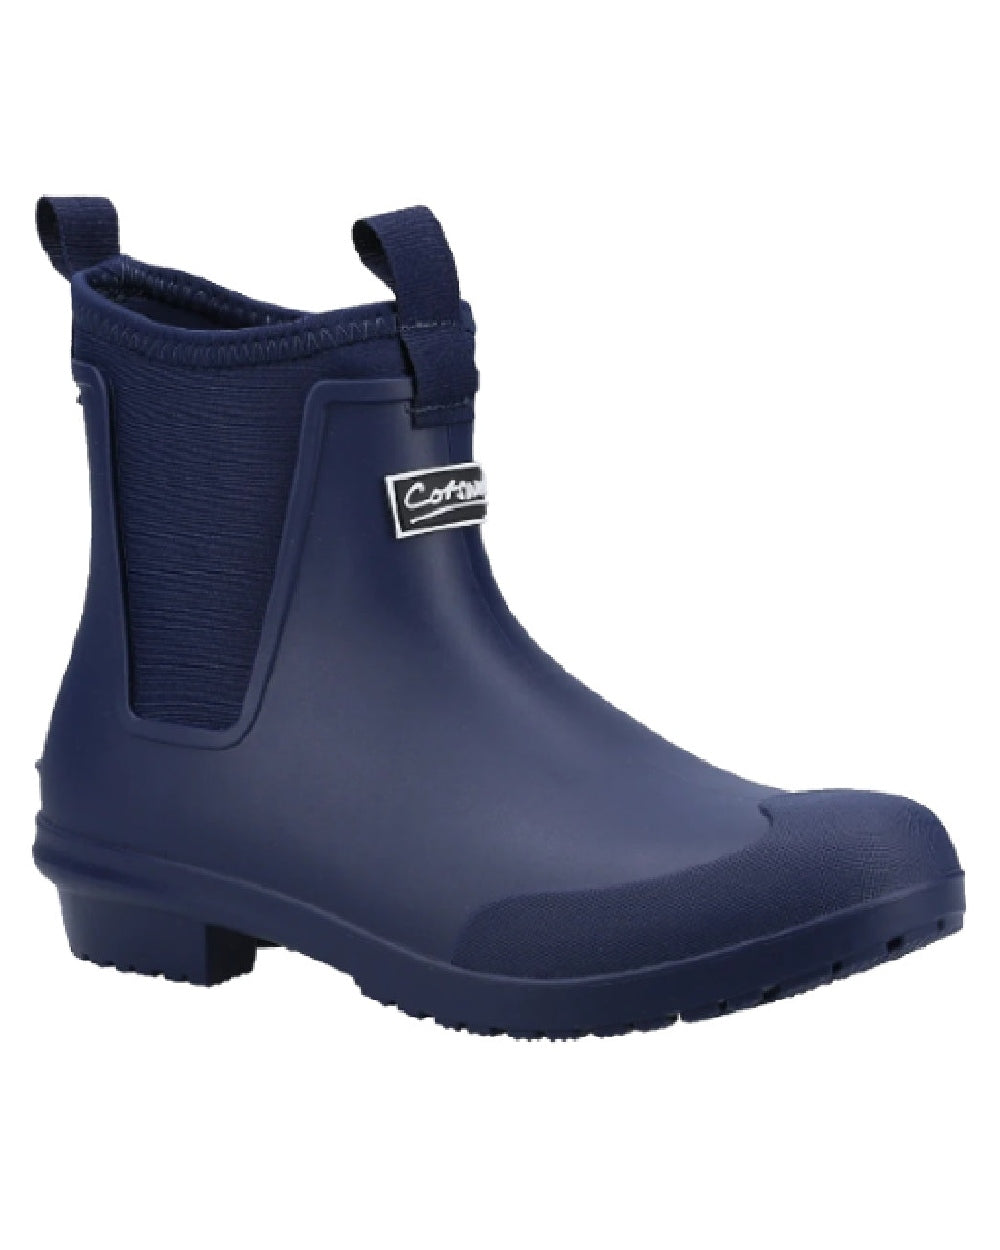 Navy coloured Cotswold Grosvenor Wellington Boots on white background 